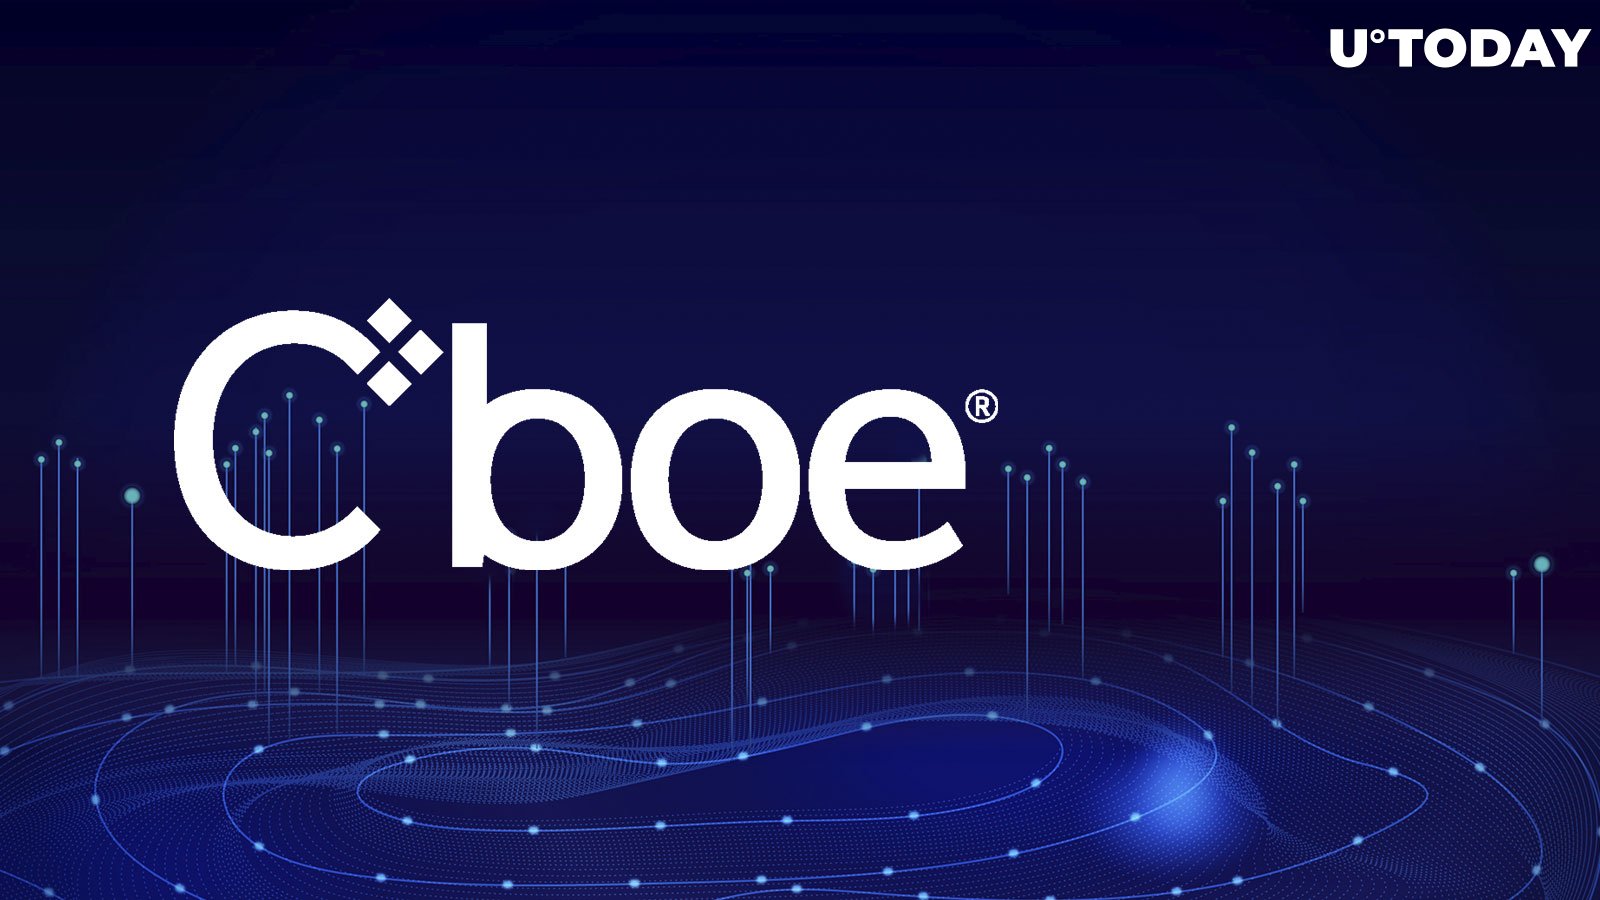 Cboe Plans to Go Beyond Bitcoin (BTC), Bitcoin Cash (BCH), Ether (ETH) and Litecoin (LTC)